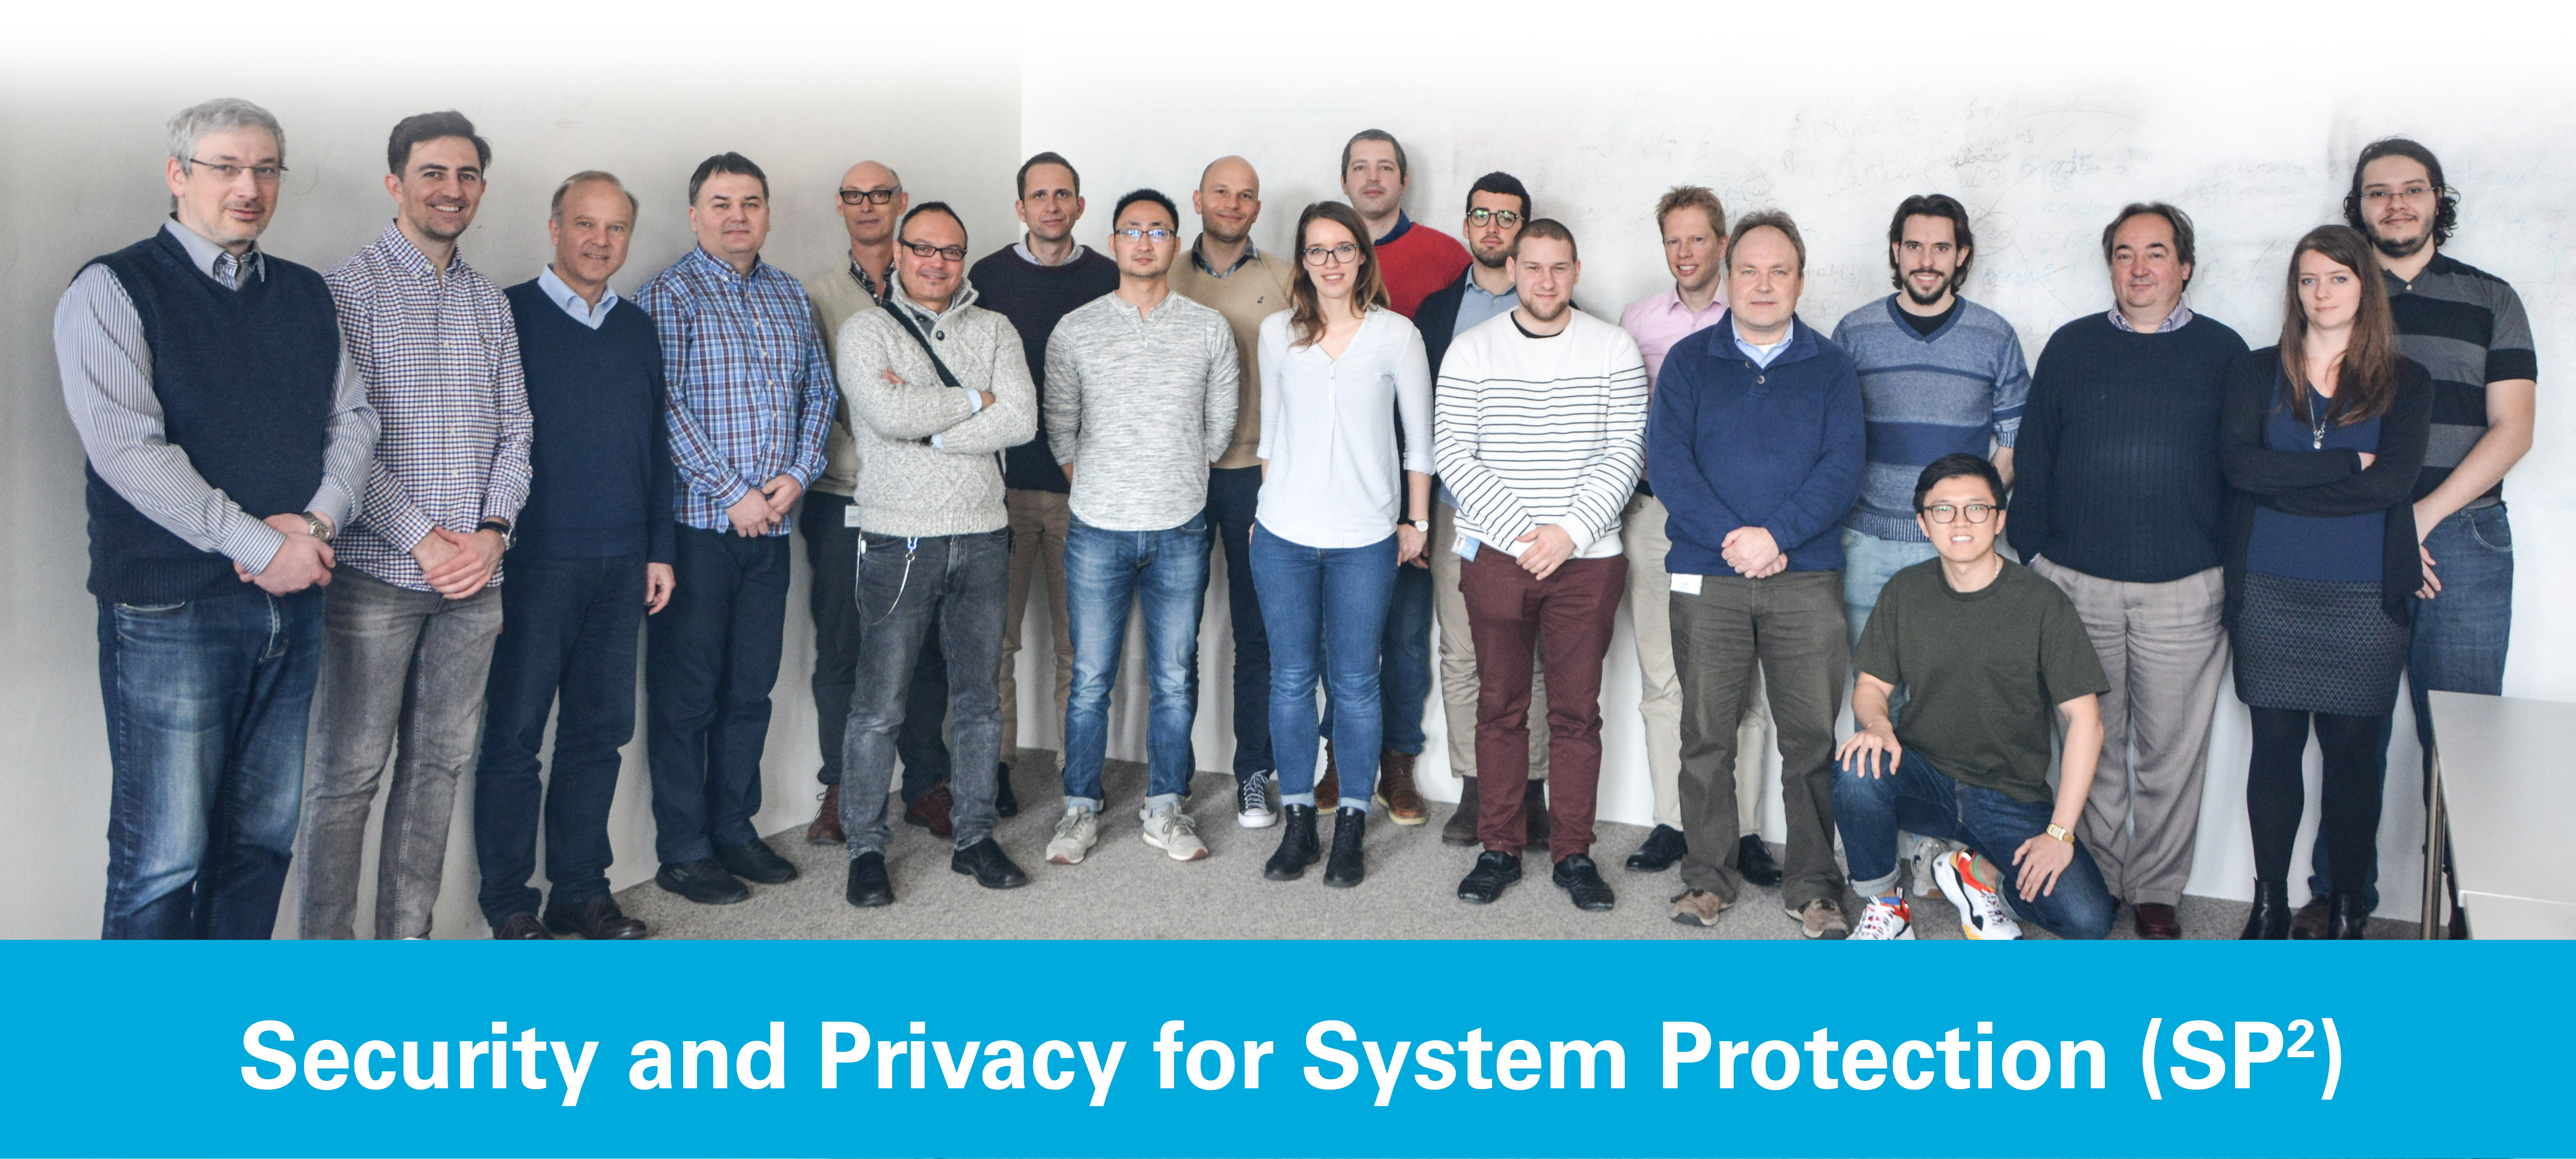 Security and Privacy for System Protection